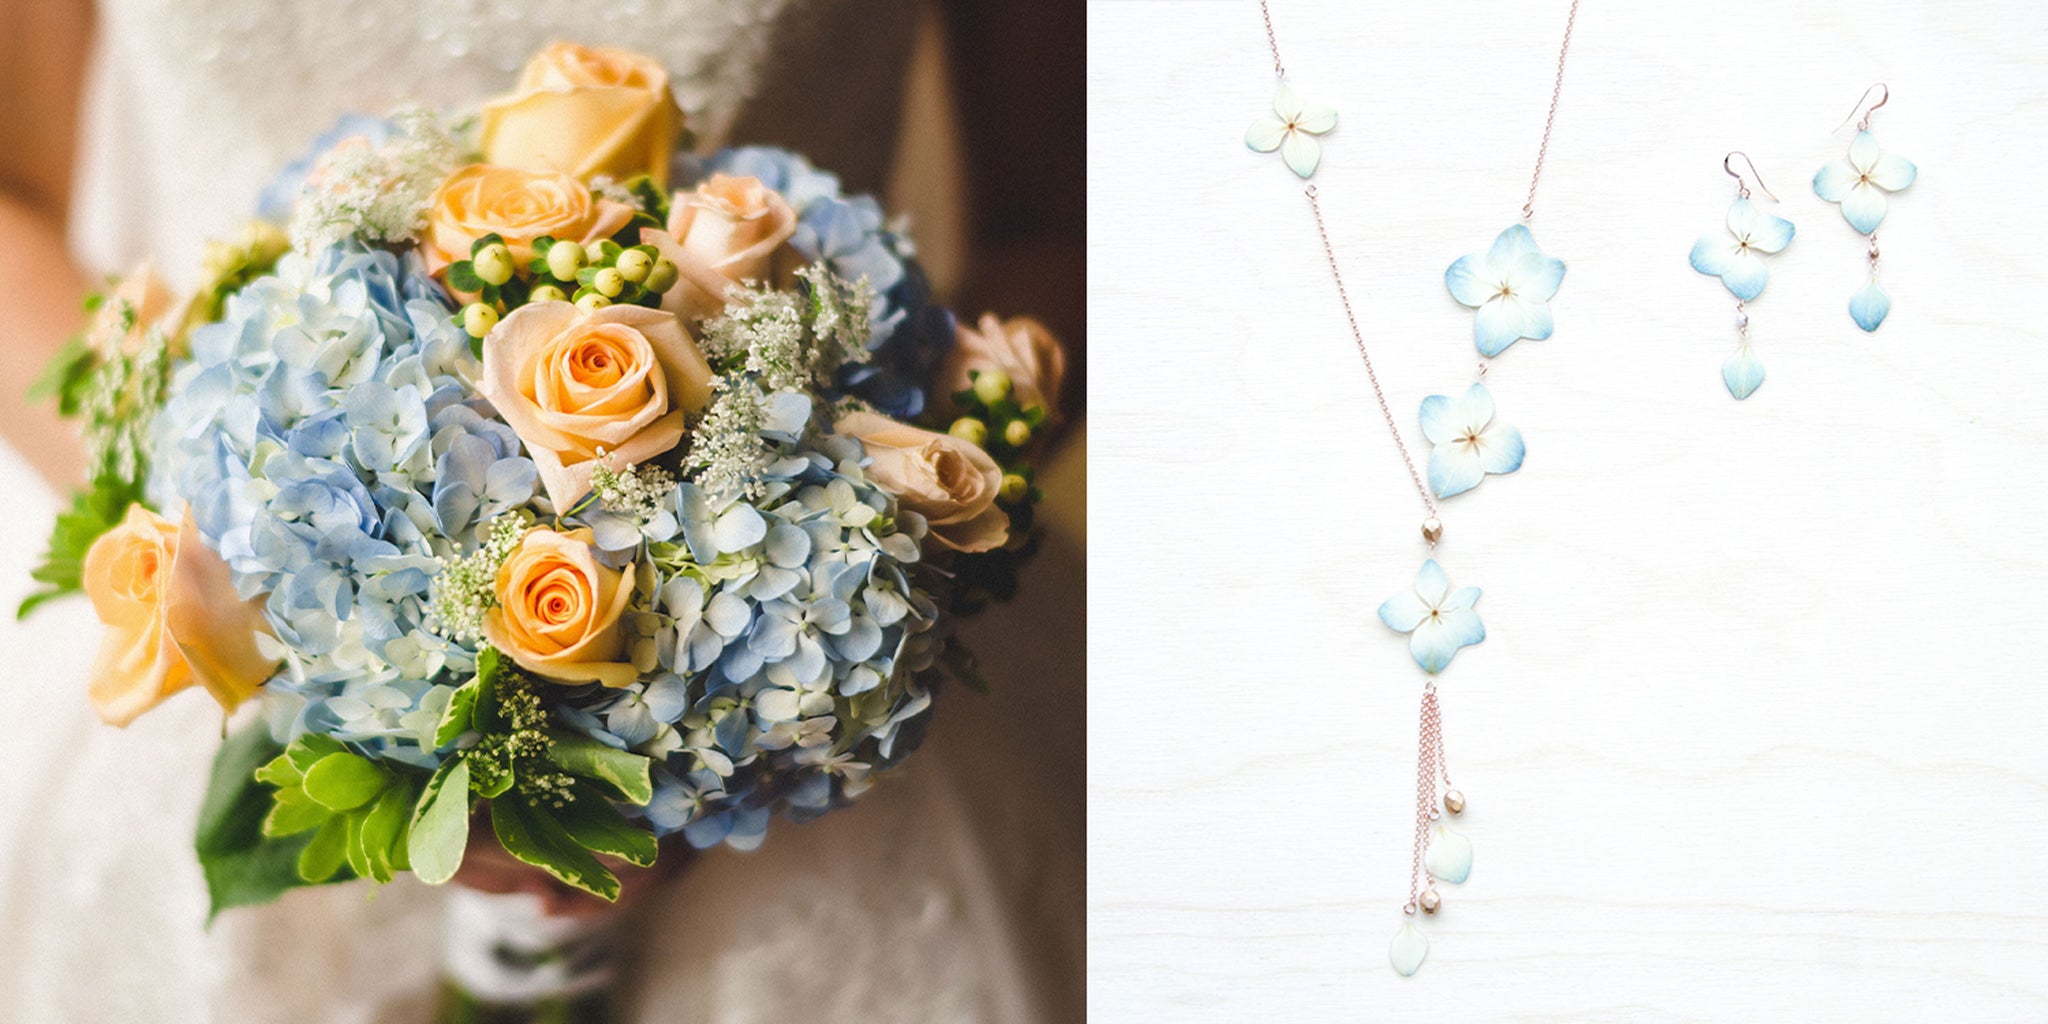 2019 before + after: wedding flowers transformed into jewelry - part o –  IMPRESSED by nature - pressed flower jewelry + bouquet preservation